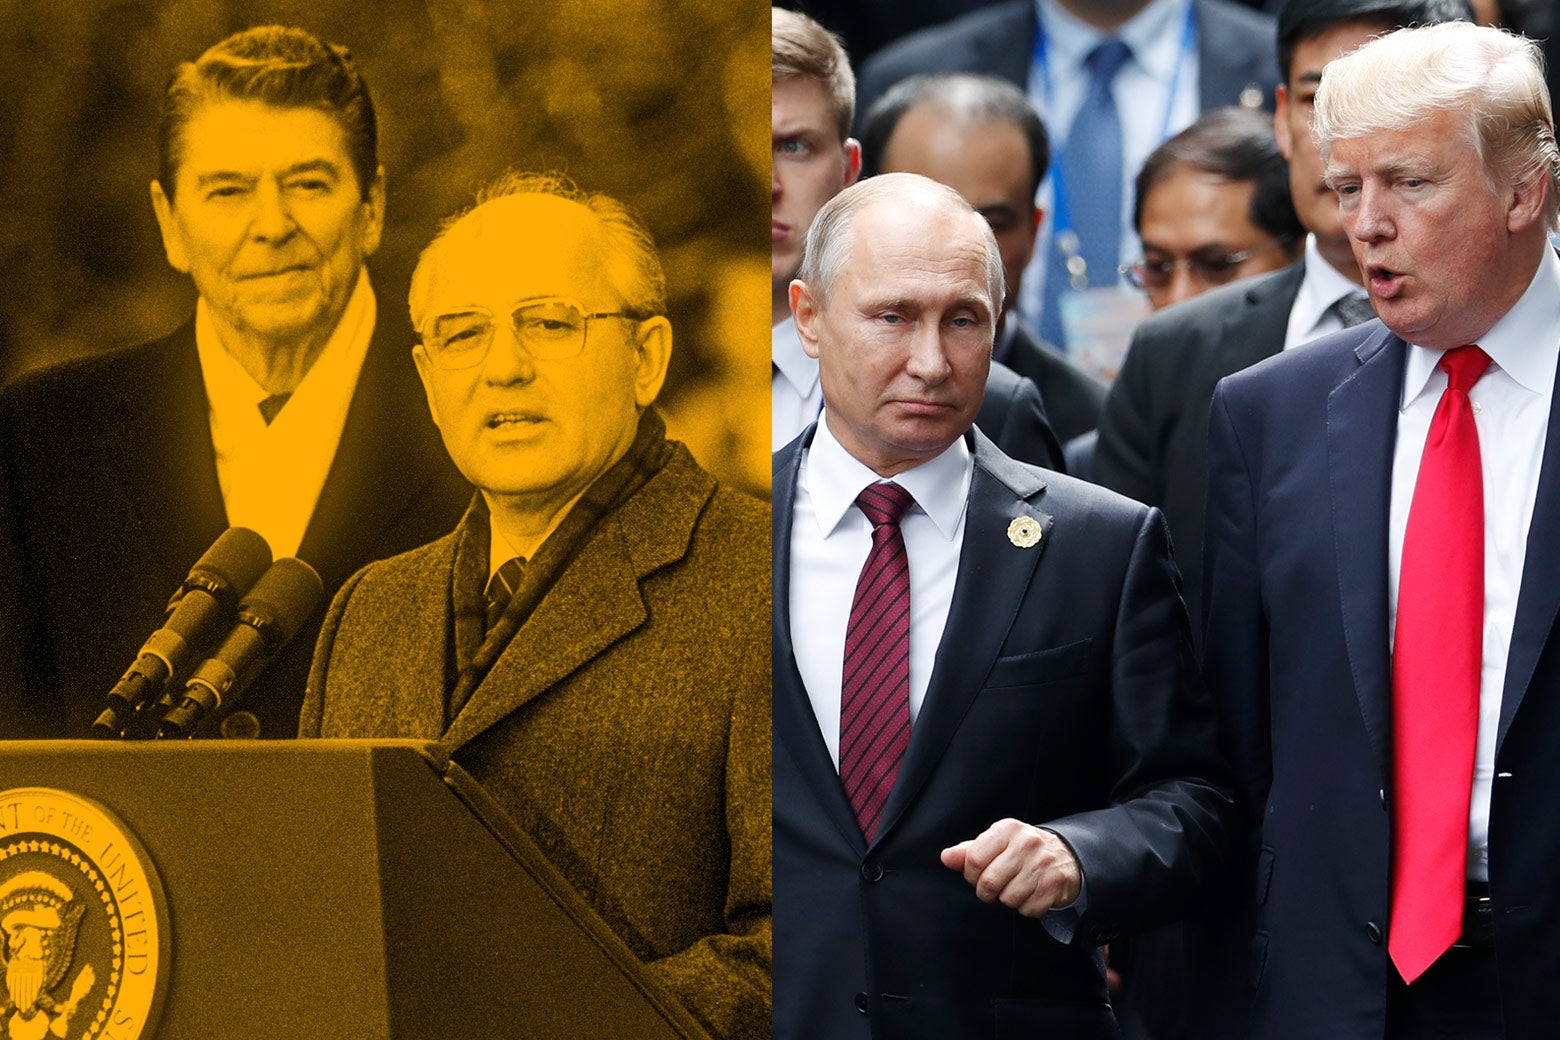 Side by side of President Ronald Reagan with Soviet leader Mikhail Gorbachev and President Donald Trump with Russia’s President Vladimir Putin.